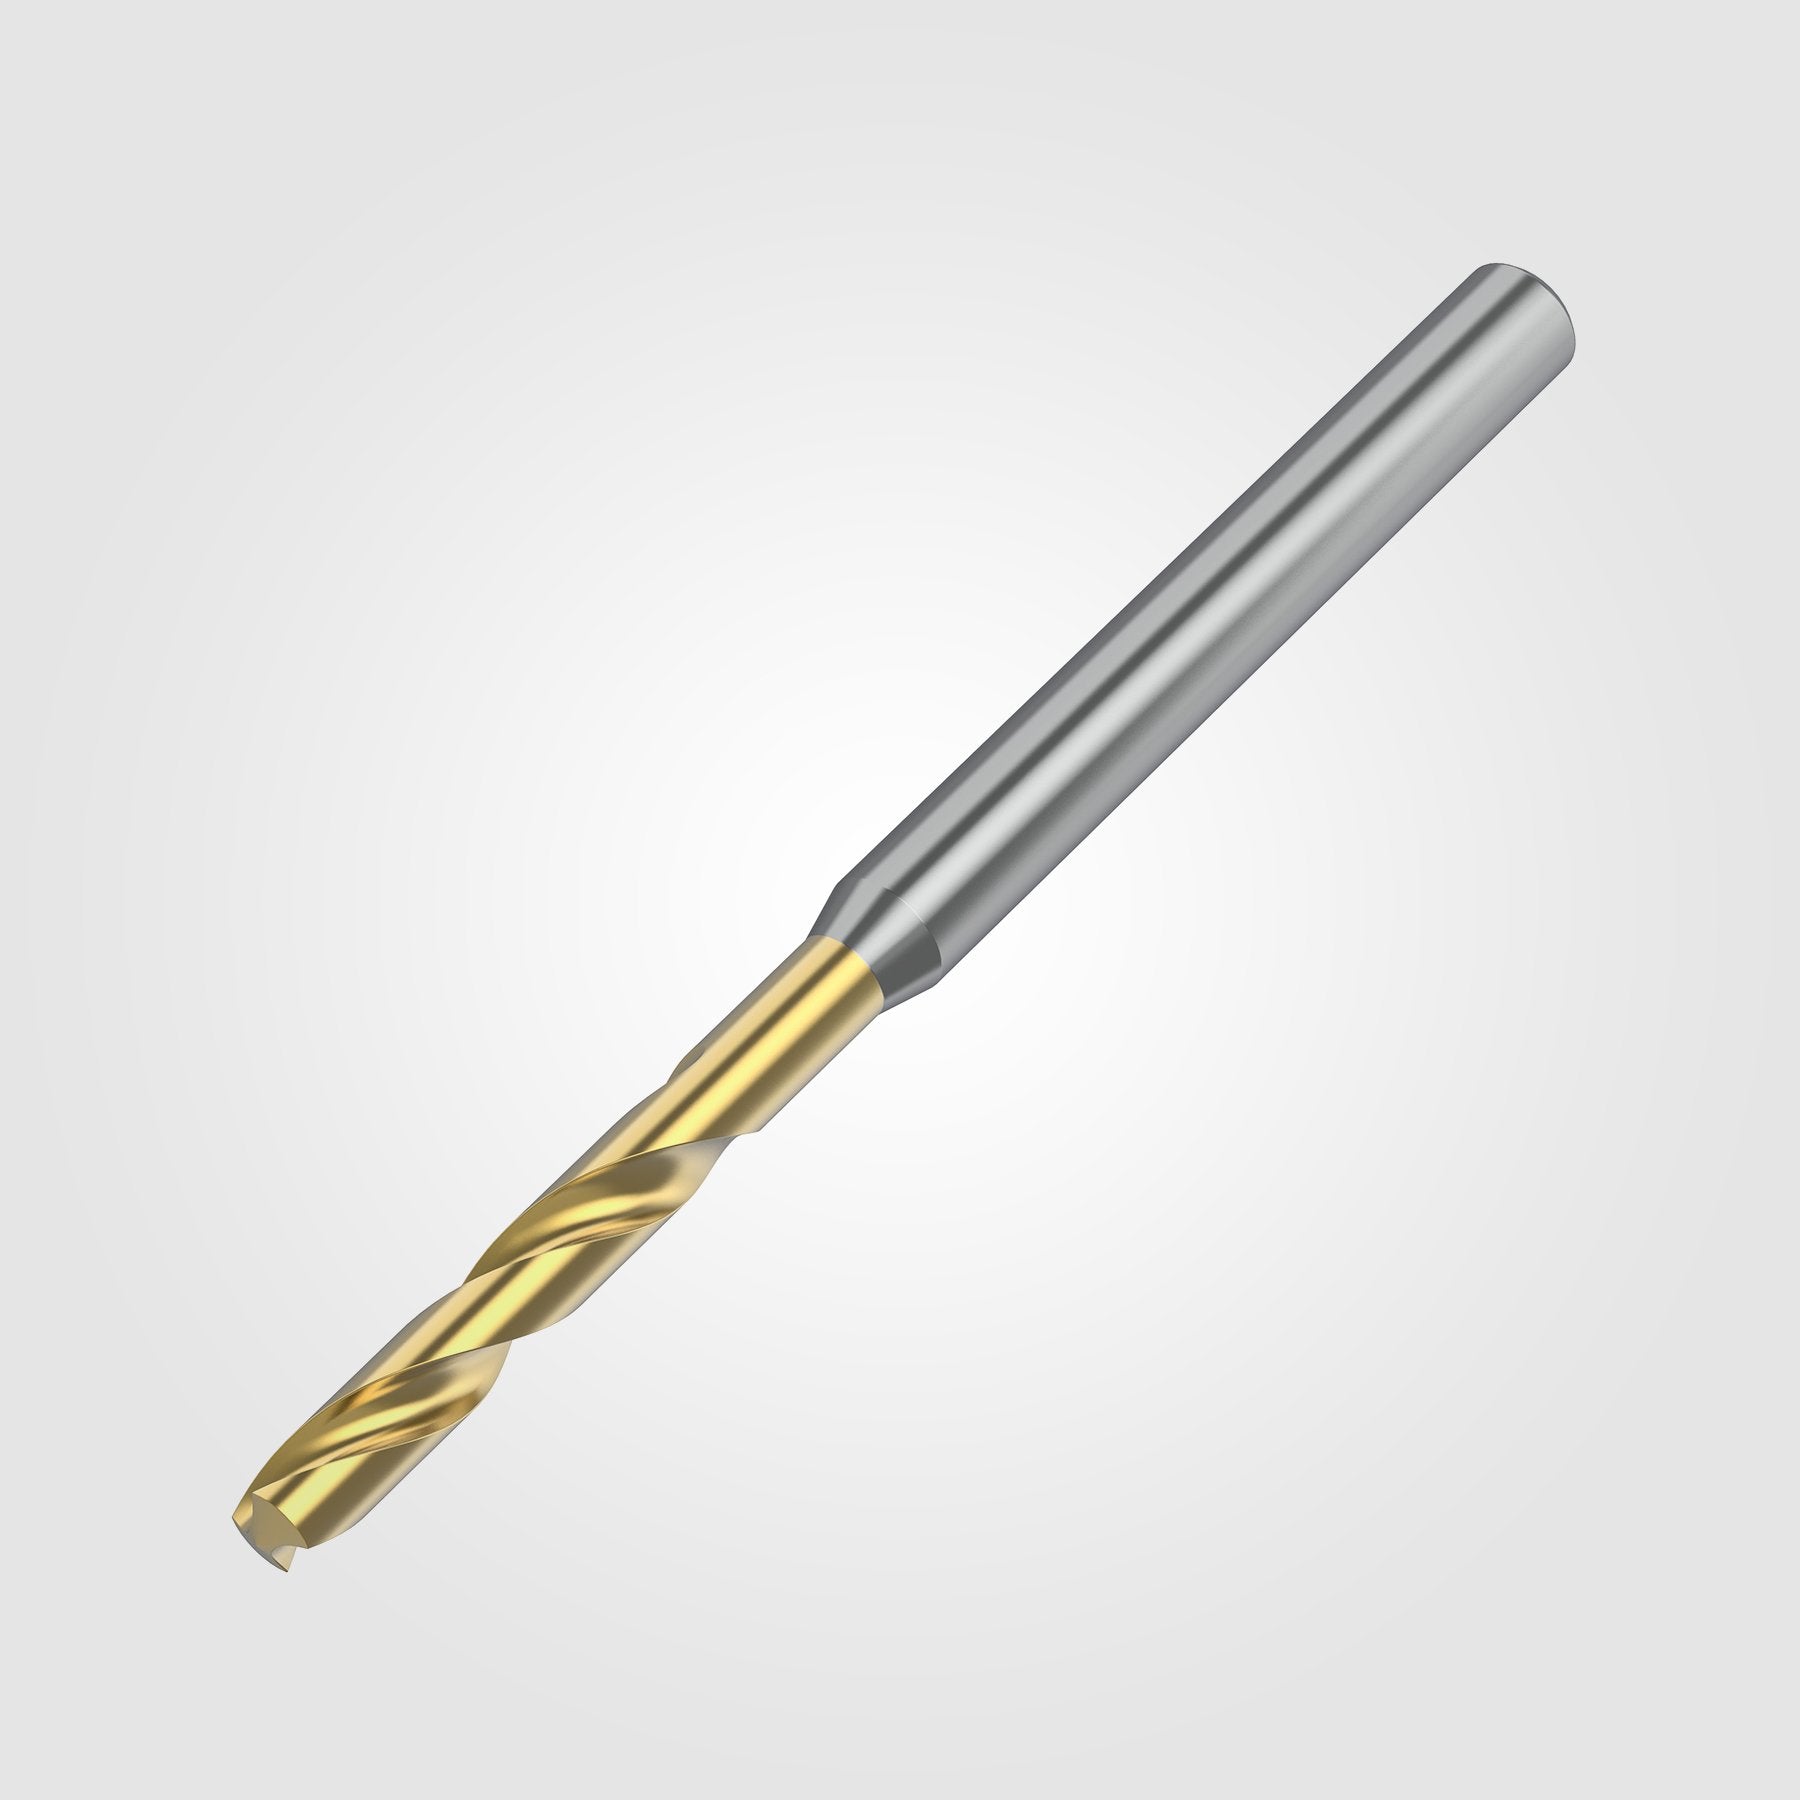 GOdrill (THROUGH COOLANT) | 10.716mm / .4219" / 5xD | SOLID CARBIDE DRILL | 4149299